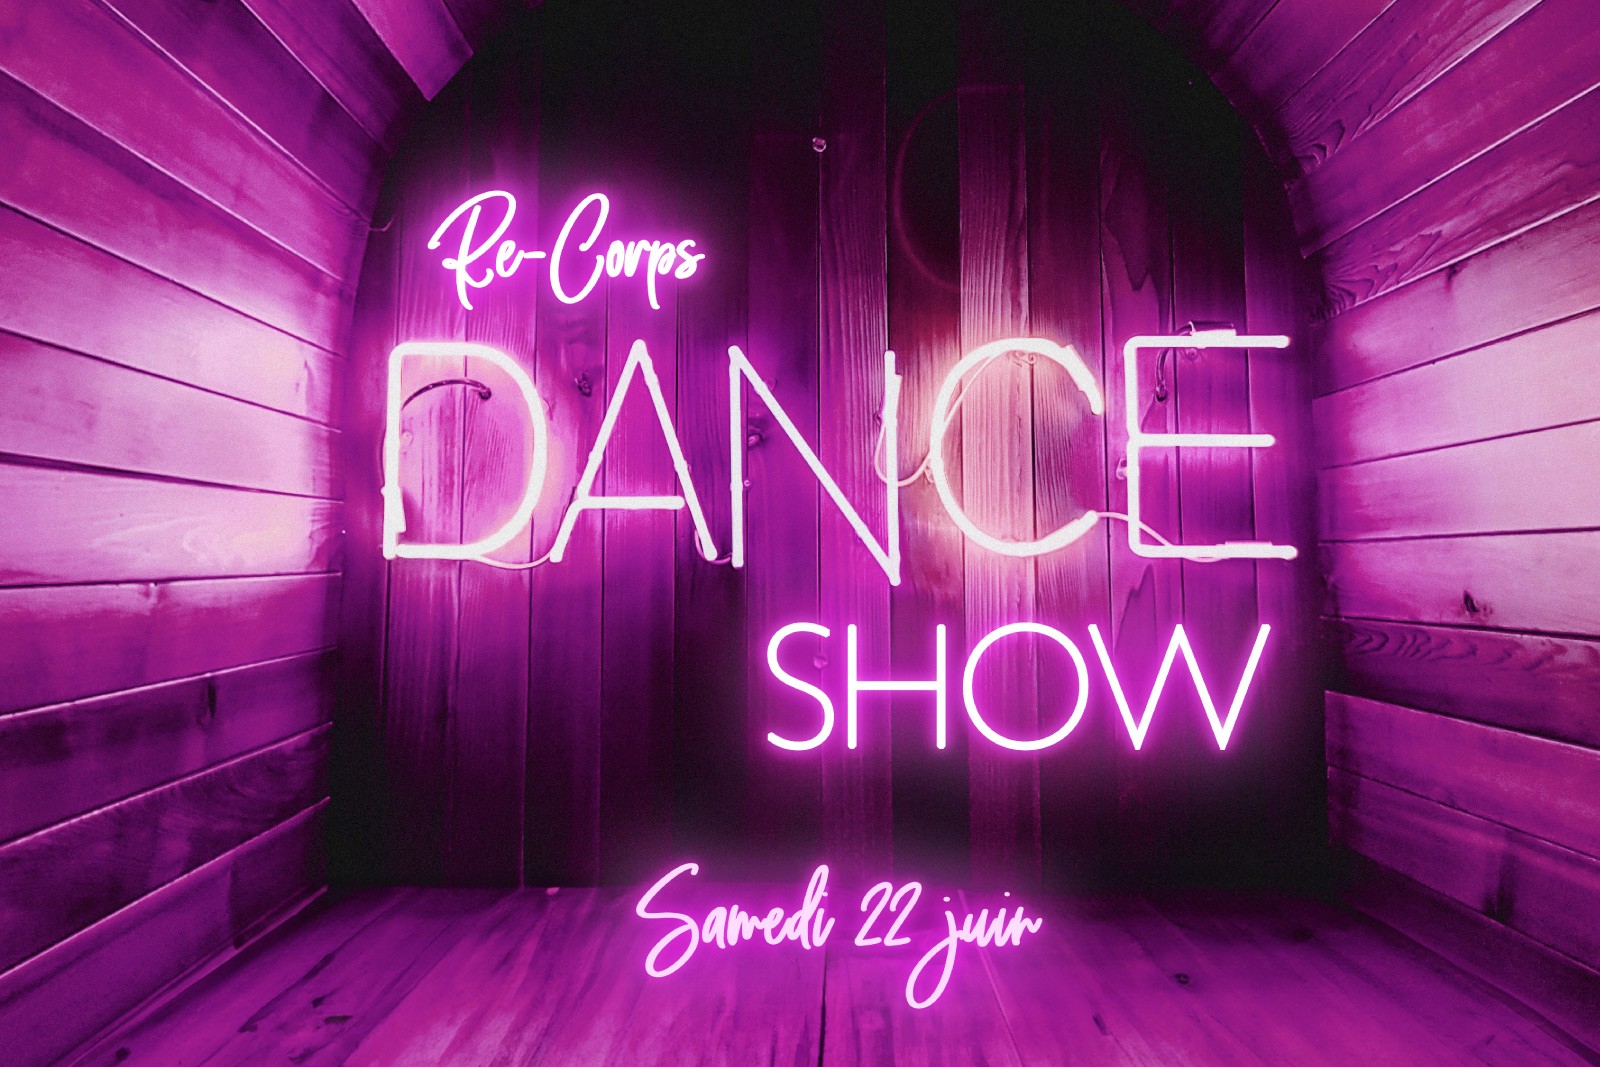 RE-CORPS DANCE SHOW !